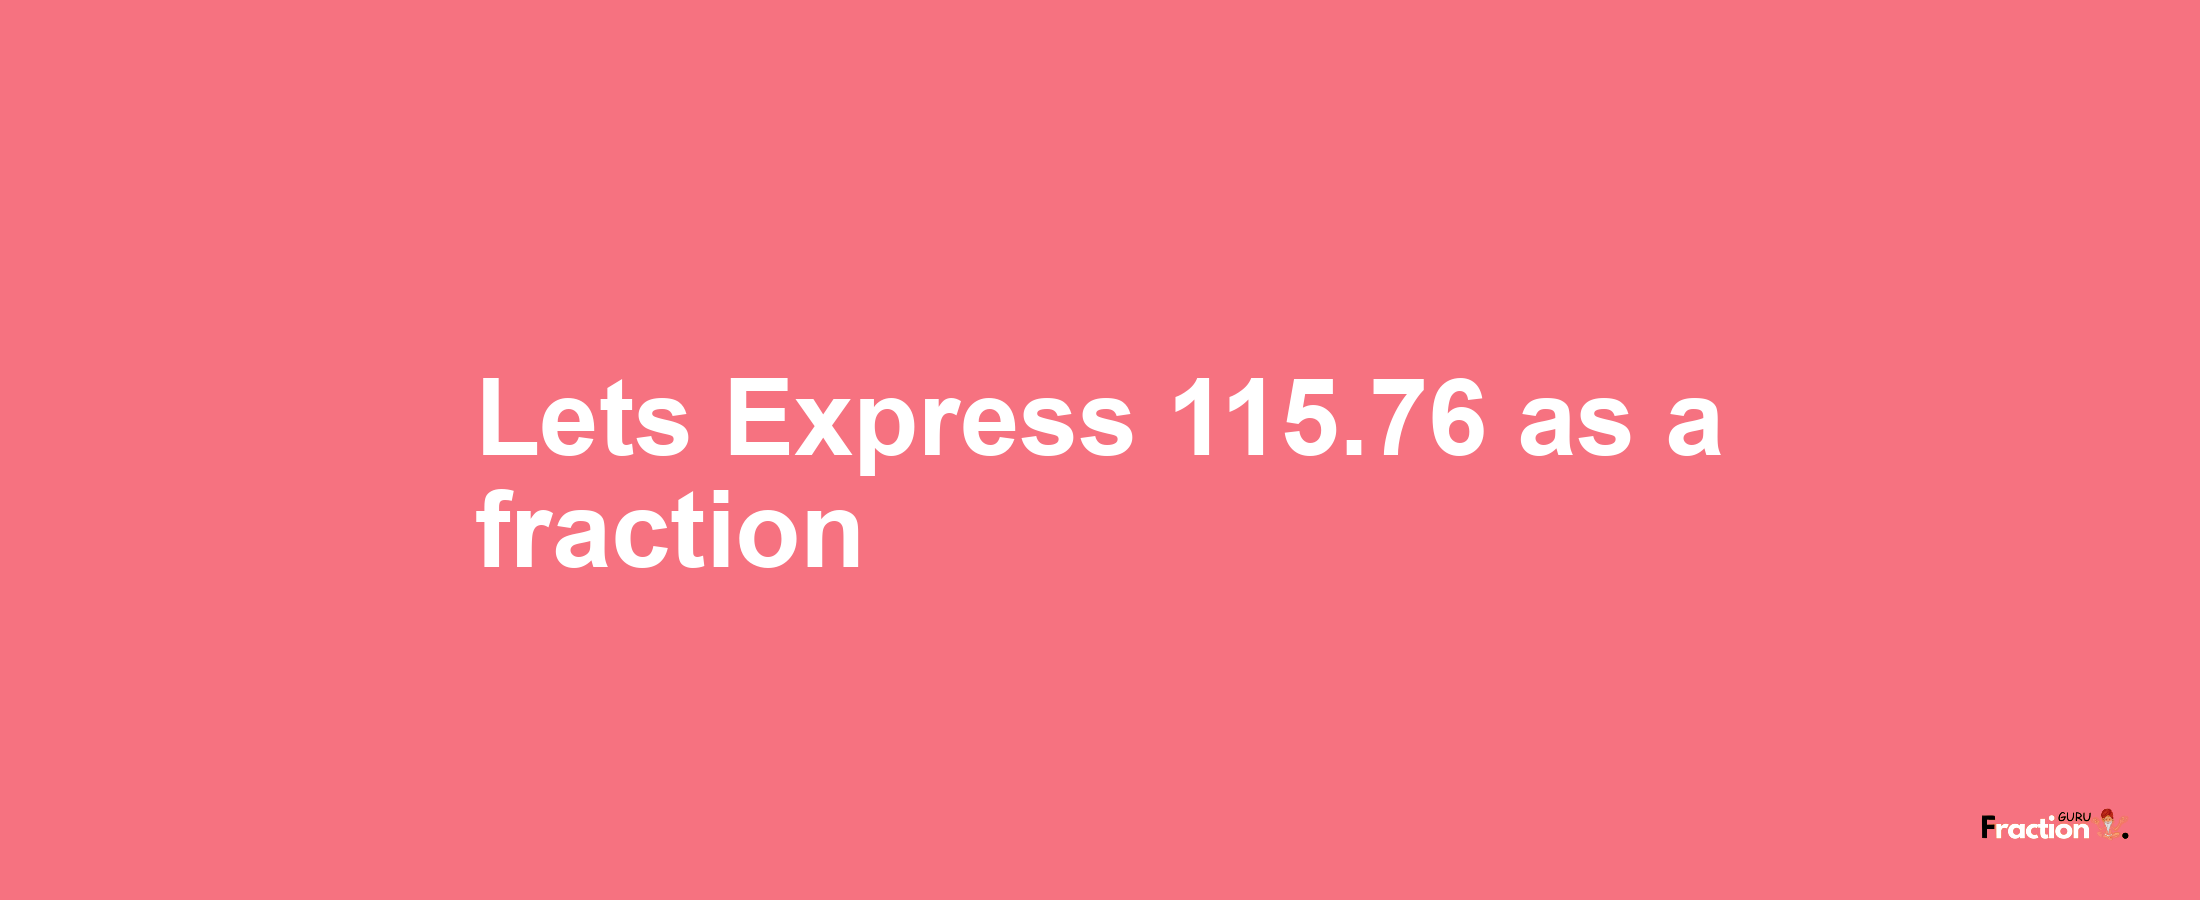 Lets Express 115.76 as afraction